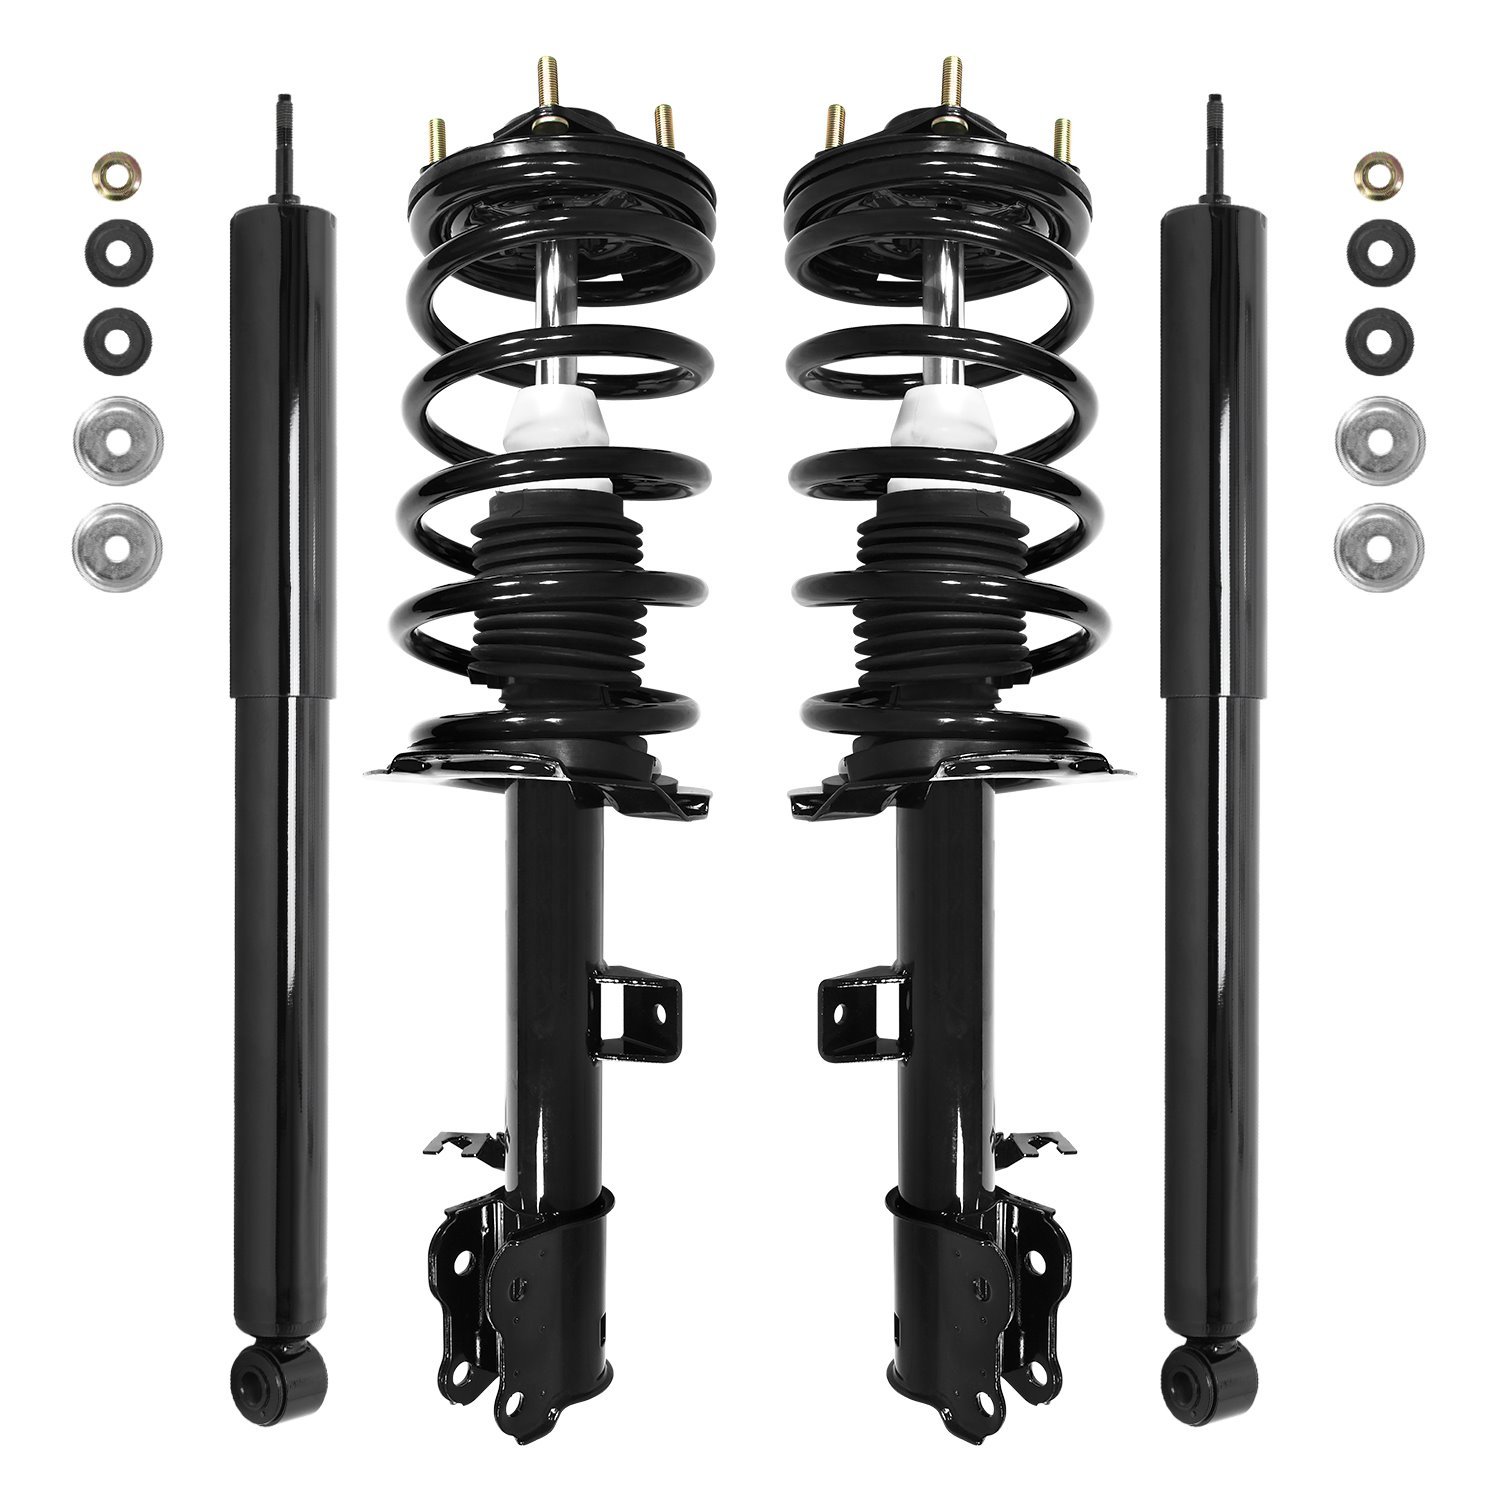 4-11621-252010-001 Front & Rear Suspension Strut & Coil Spring Assembly Fits Select Ford/Mercury/Mazda